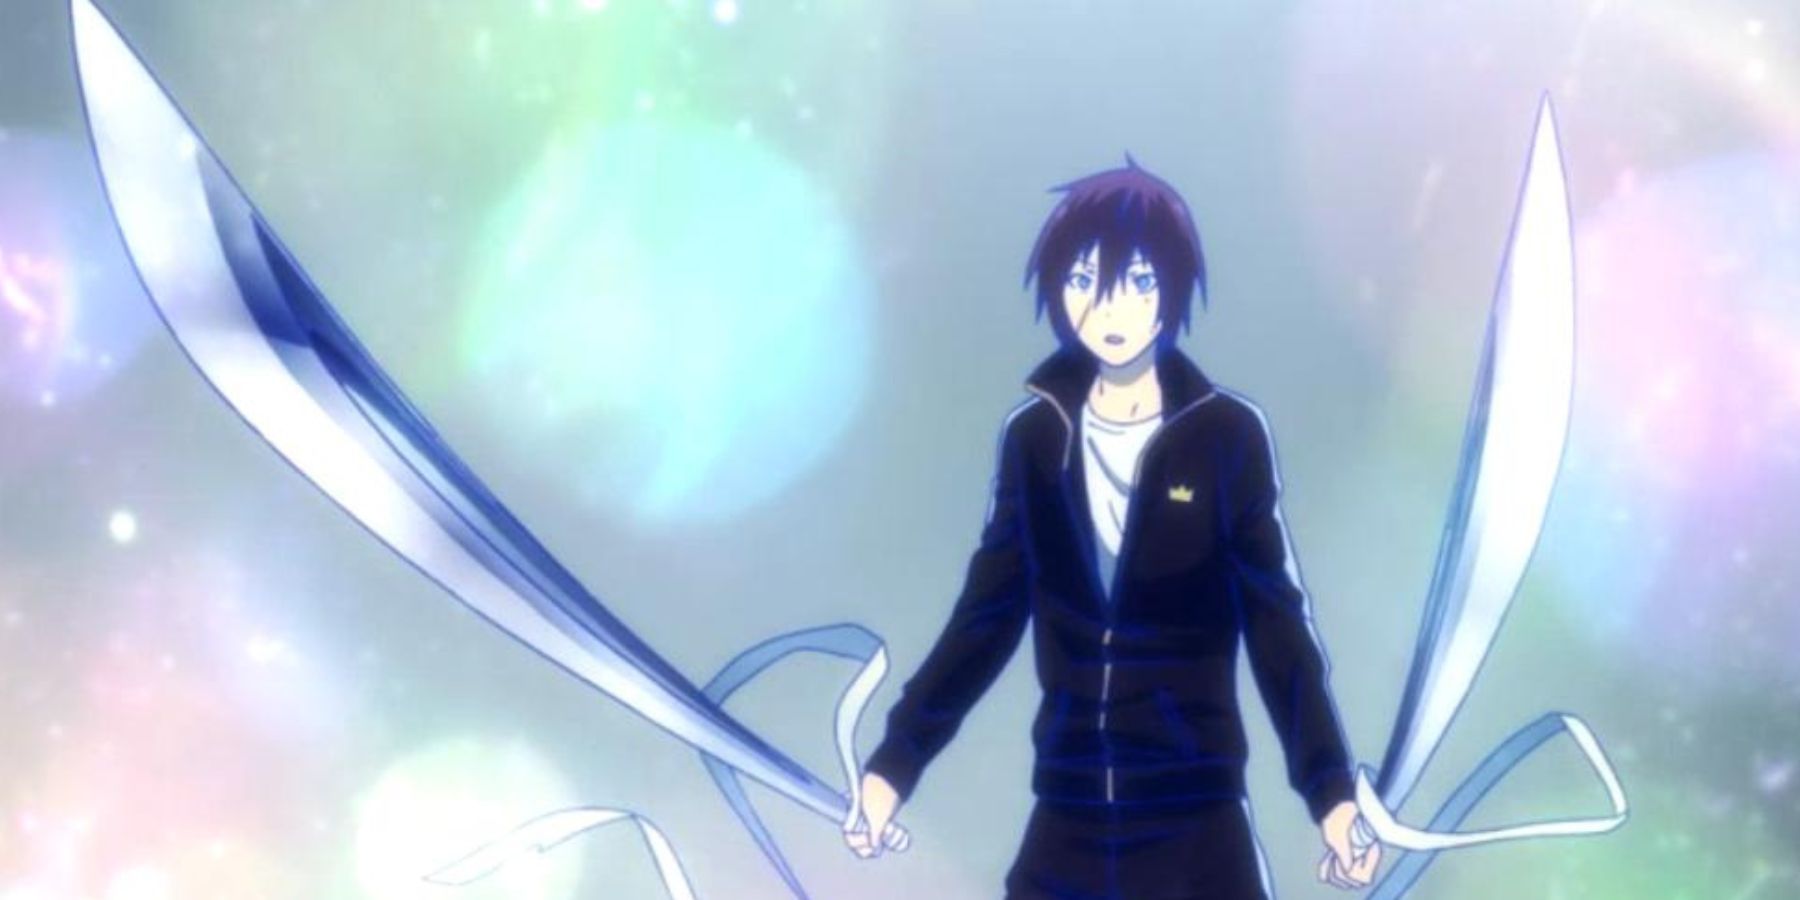 Yato And His Blessed Vessel, Yukine (Noragami)